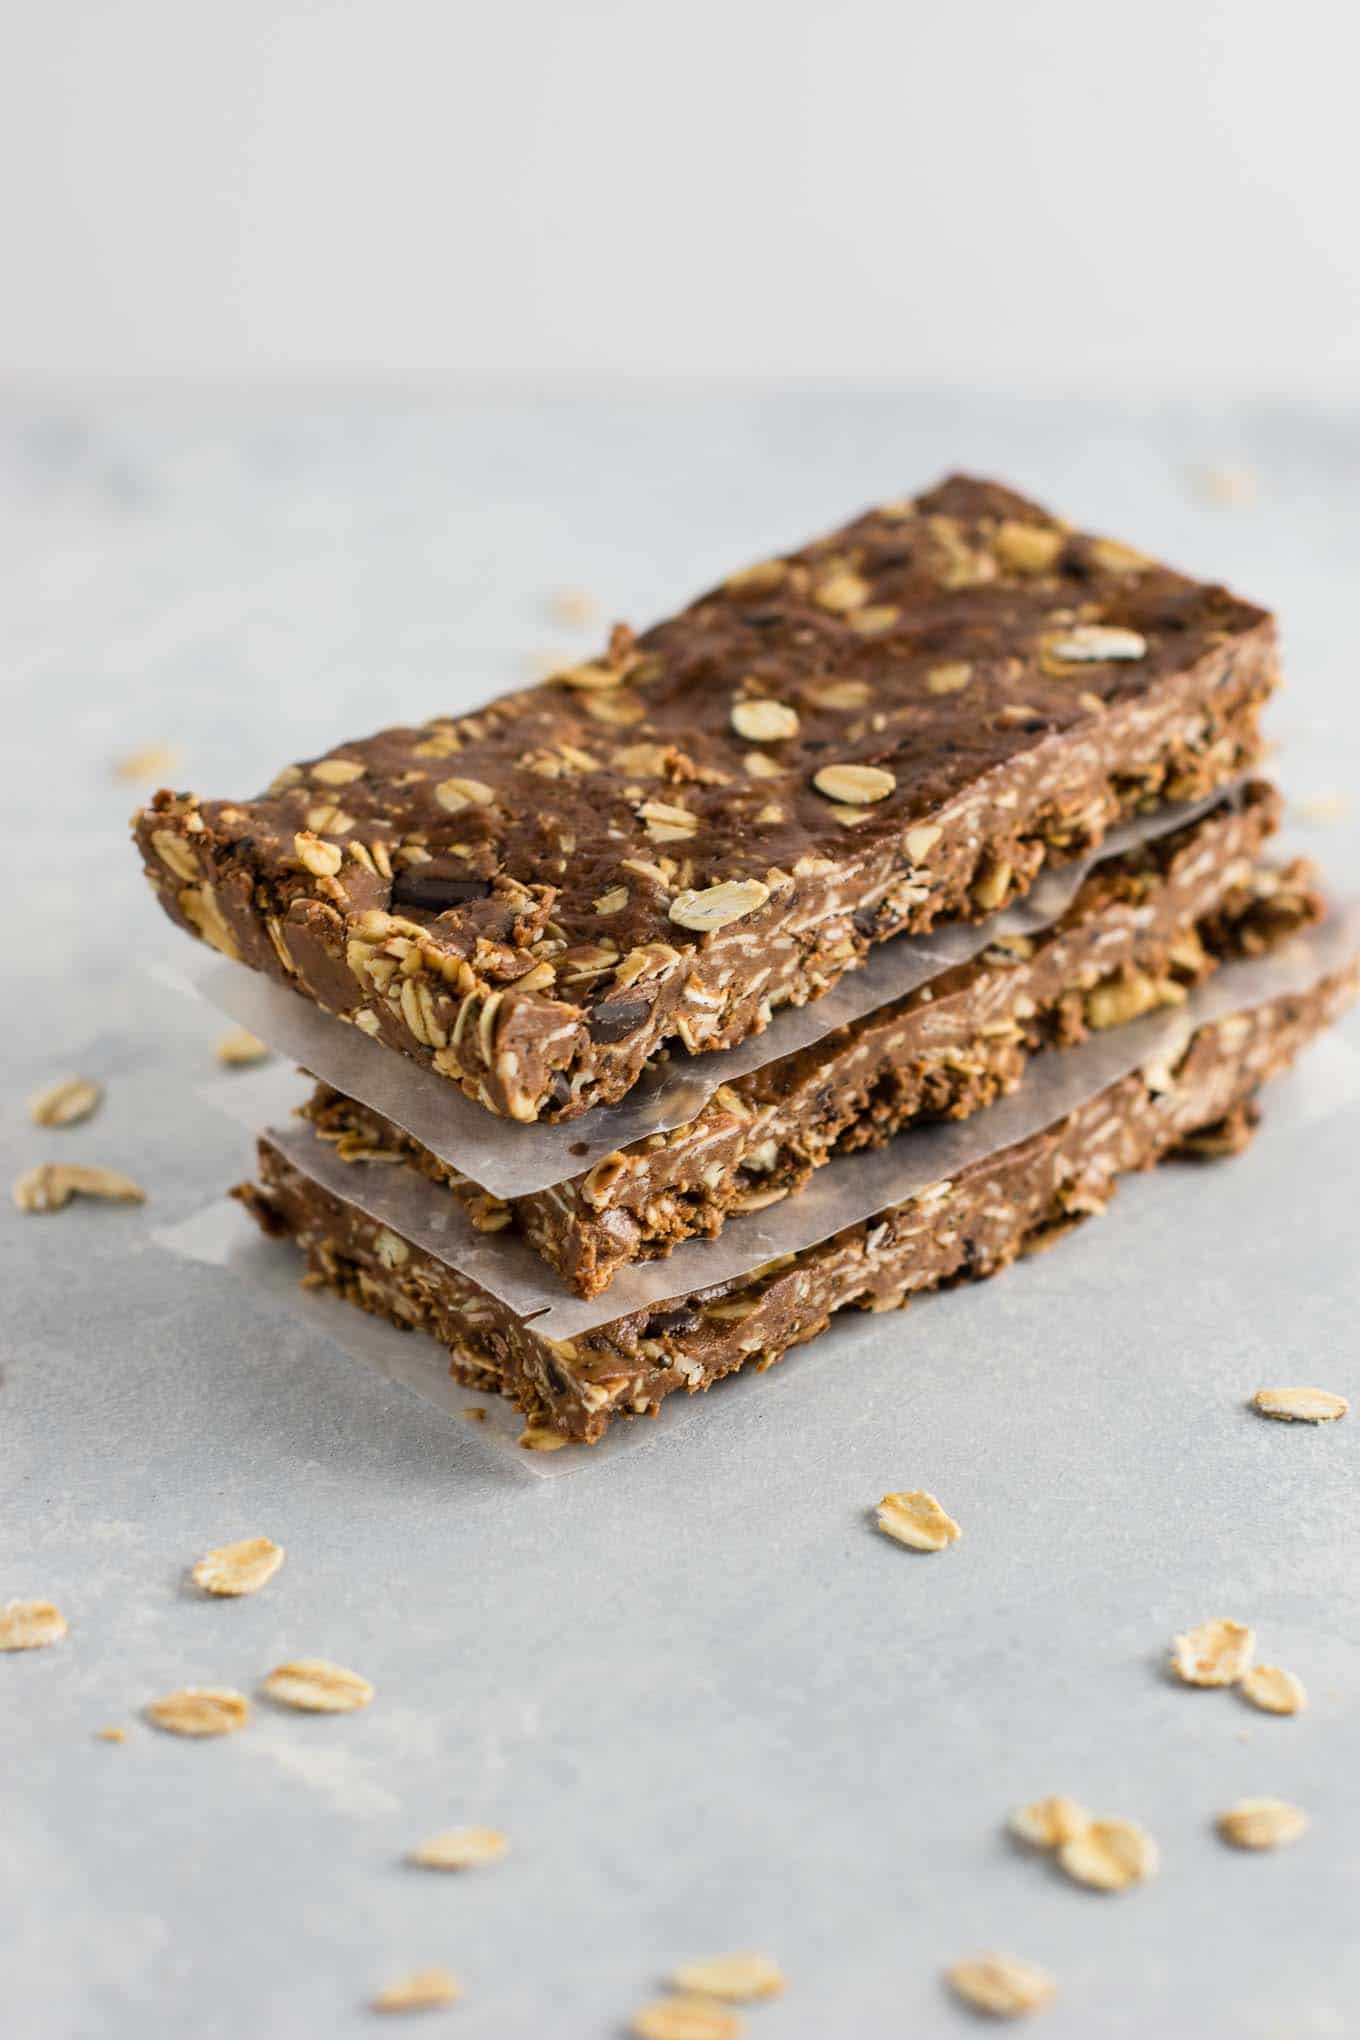 No bake chocolate cashew protein bars (vegan, gluten free.) An easy protein bar recipe perfect for meal prep. #nobake #proteinbars #vegan #glutenfree #mealprep 